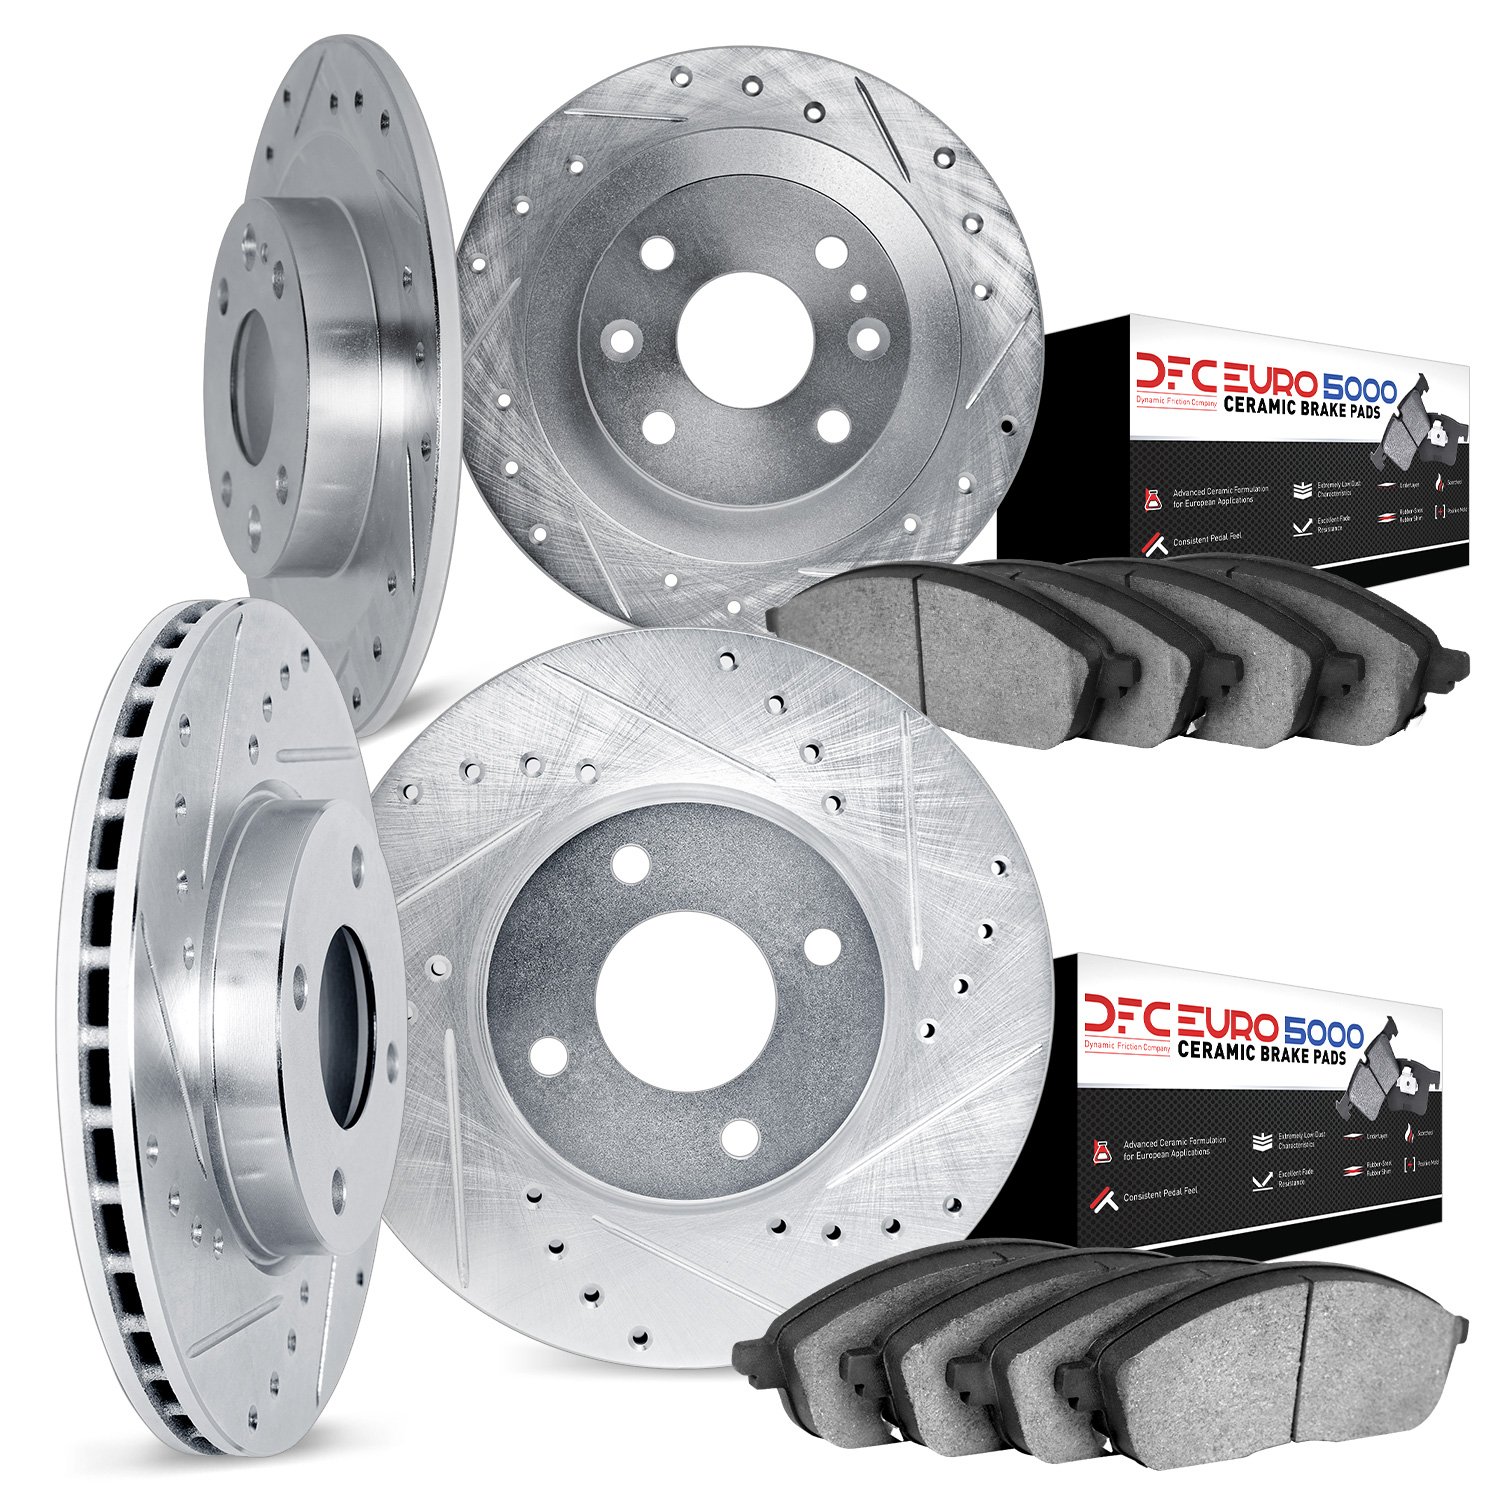 7604-07001 Drilled/Slotted Brake Rotors w/5000 Euro Ceramic Brake Pads Kit [Silver], 2013-2019 Mopar, Position: Front and Rear